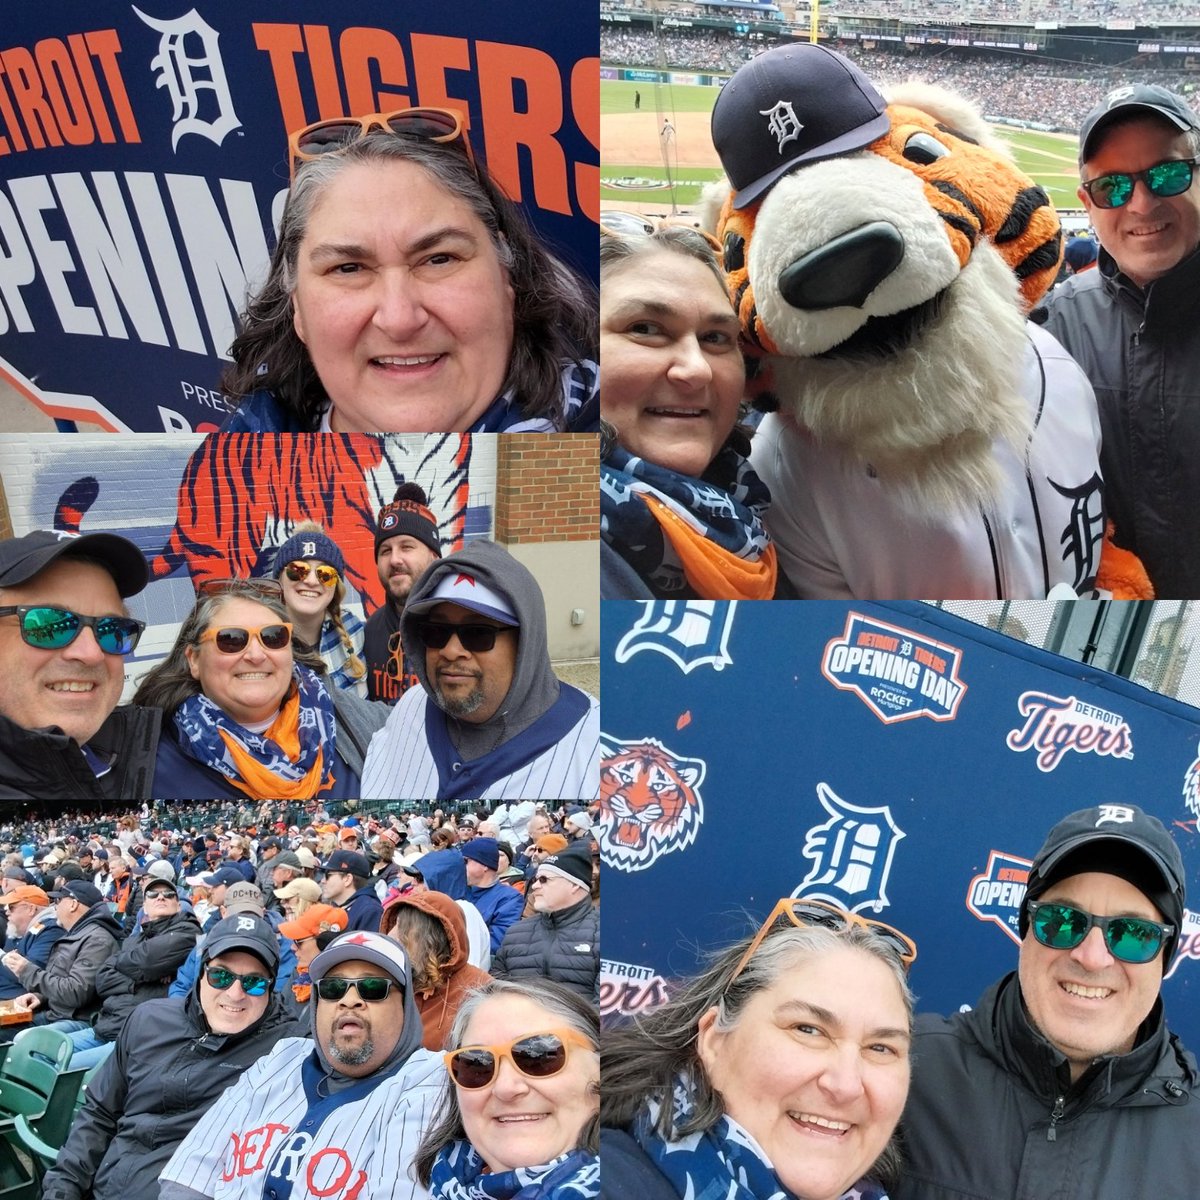 Opening day in the D with my family and @PAWSDetroit Let's go Tigers! @infinitah @mgunk1 #tigerswin #DetroitTigers #detroitroots